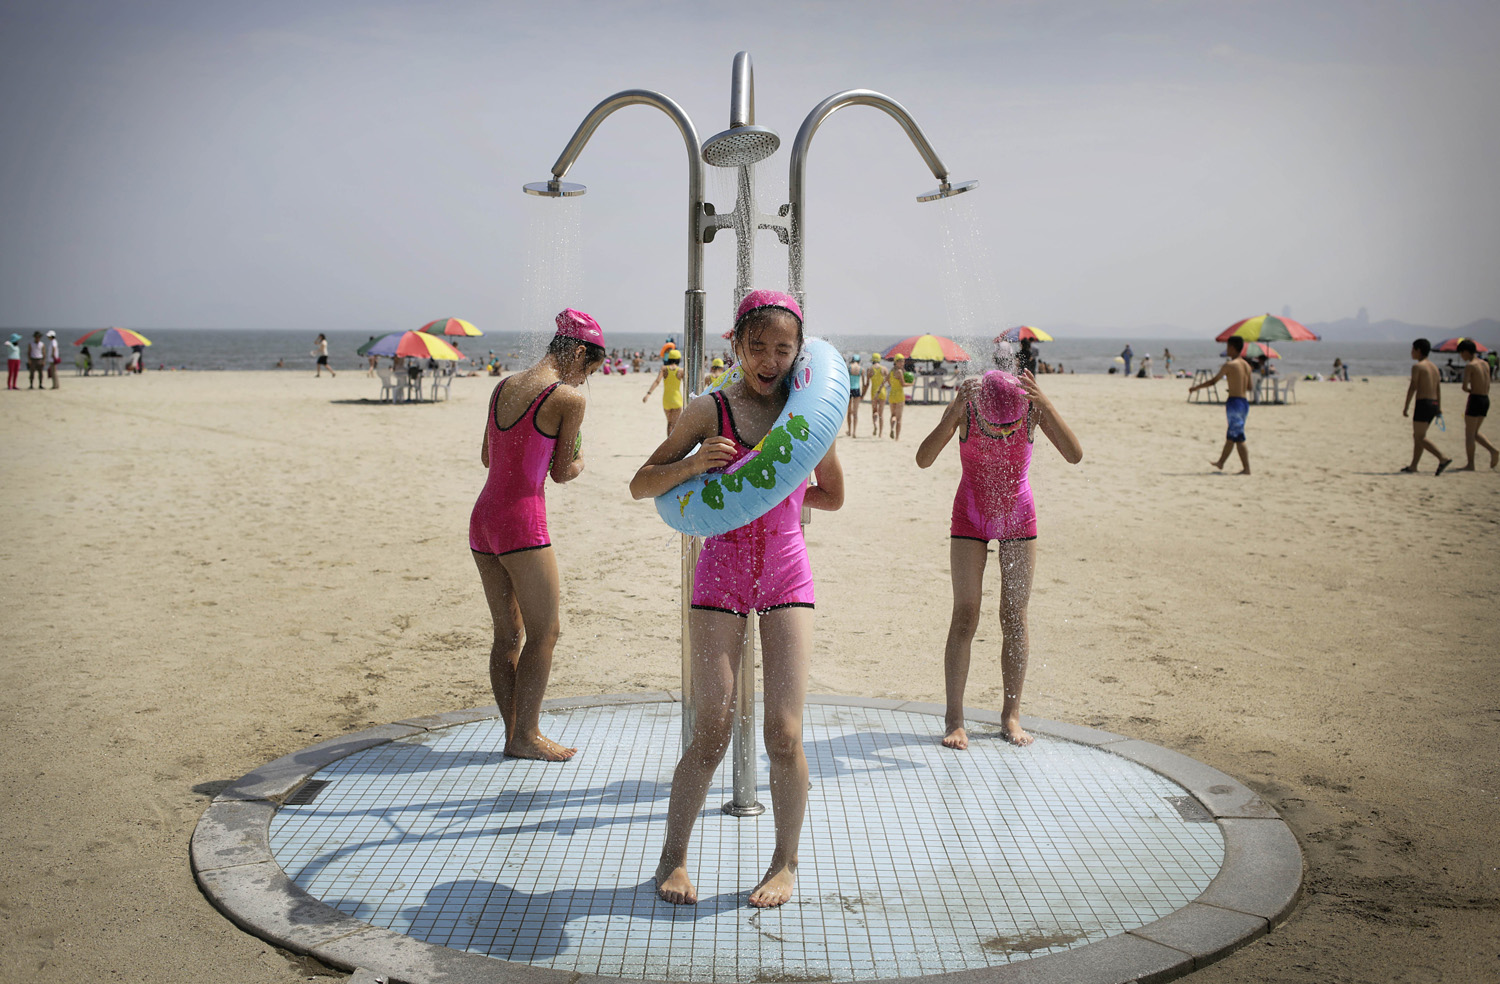 North Korean girls in similar bathing suits stand under a shower at the Songdowon International Children's Camp, Tuesday, July 29, 2014, in Wonsan, North Korea.